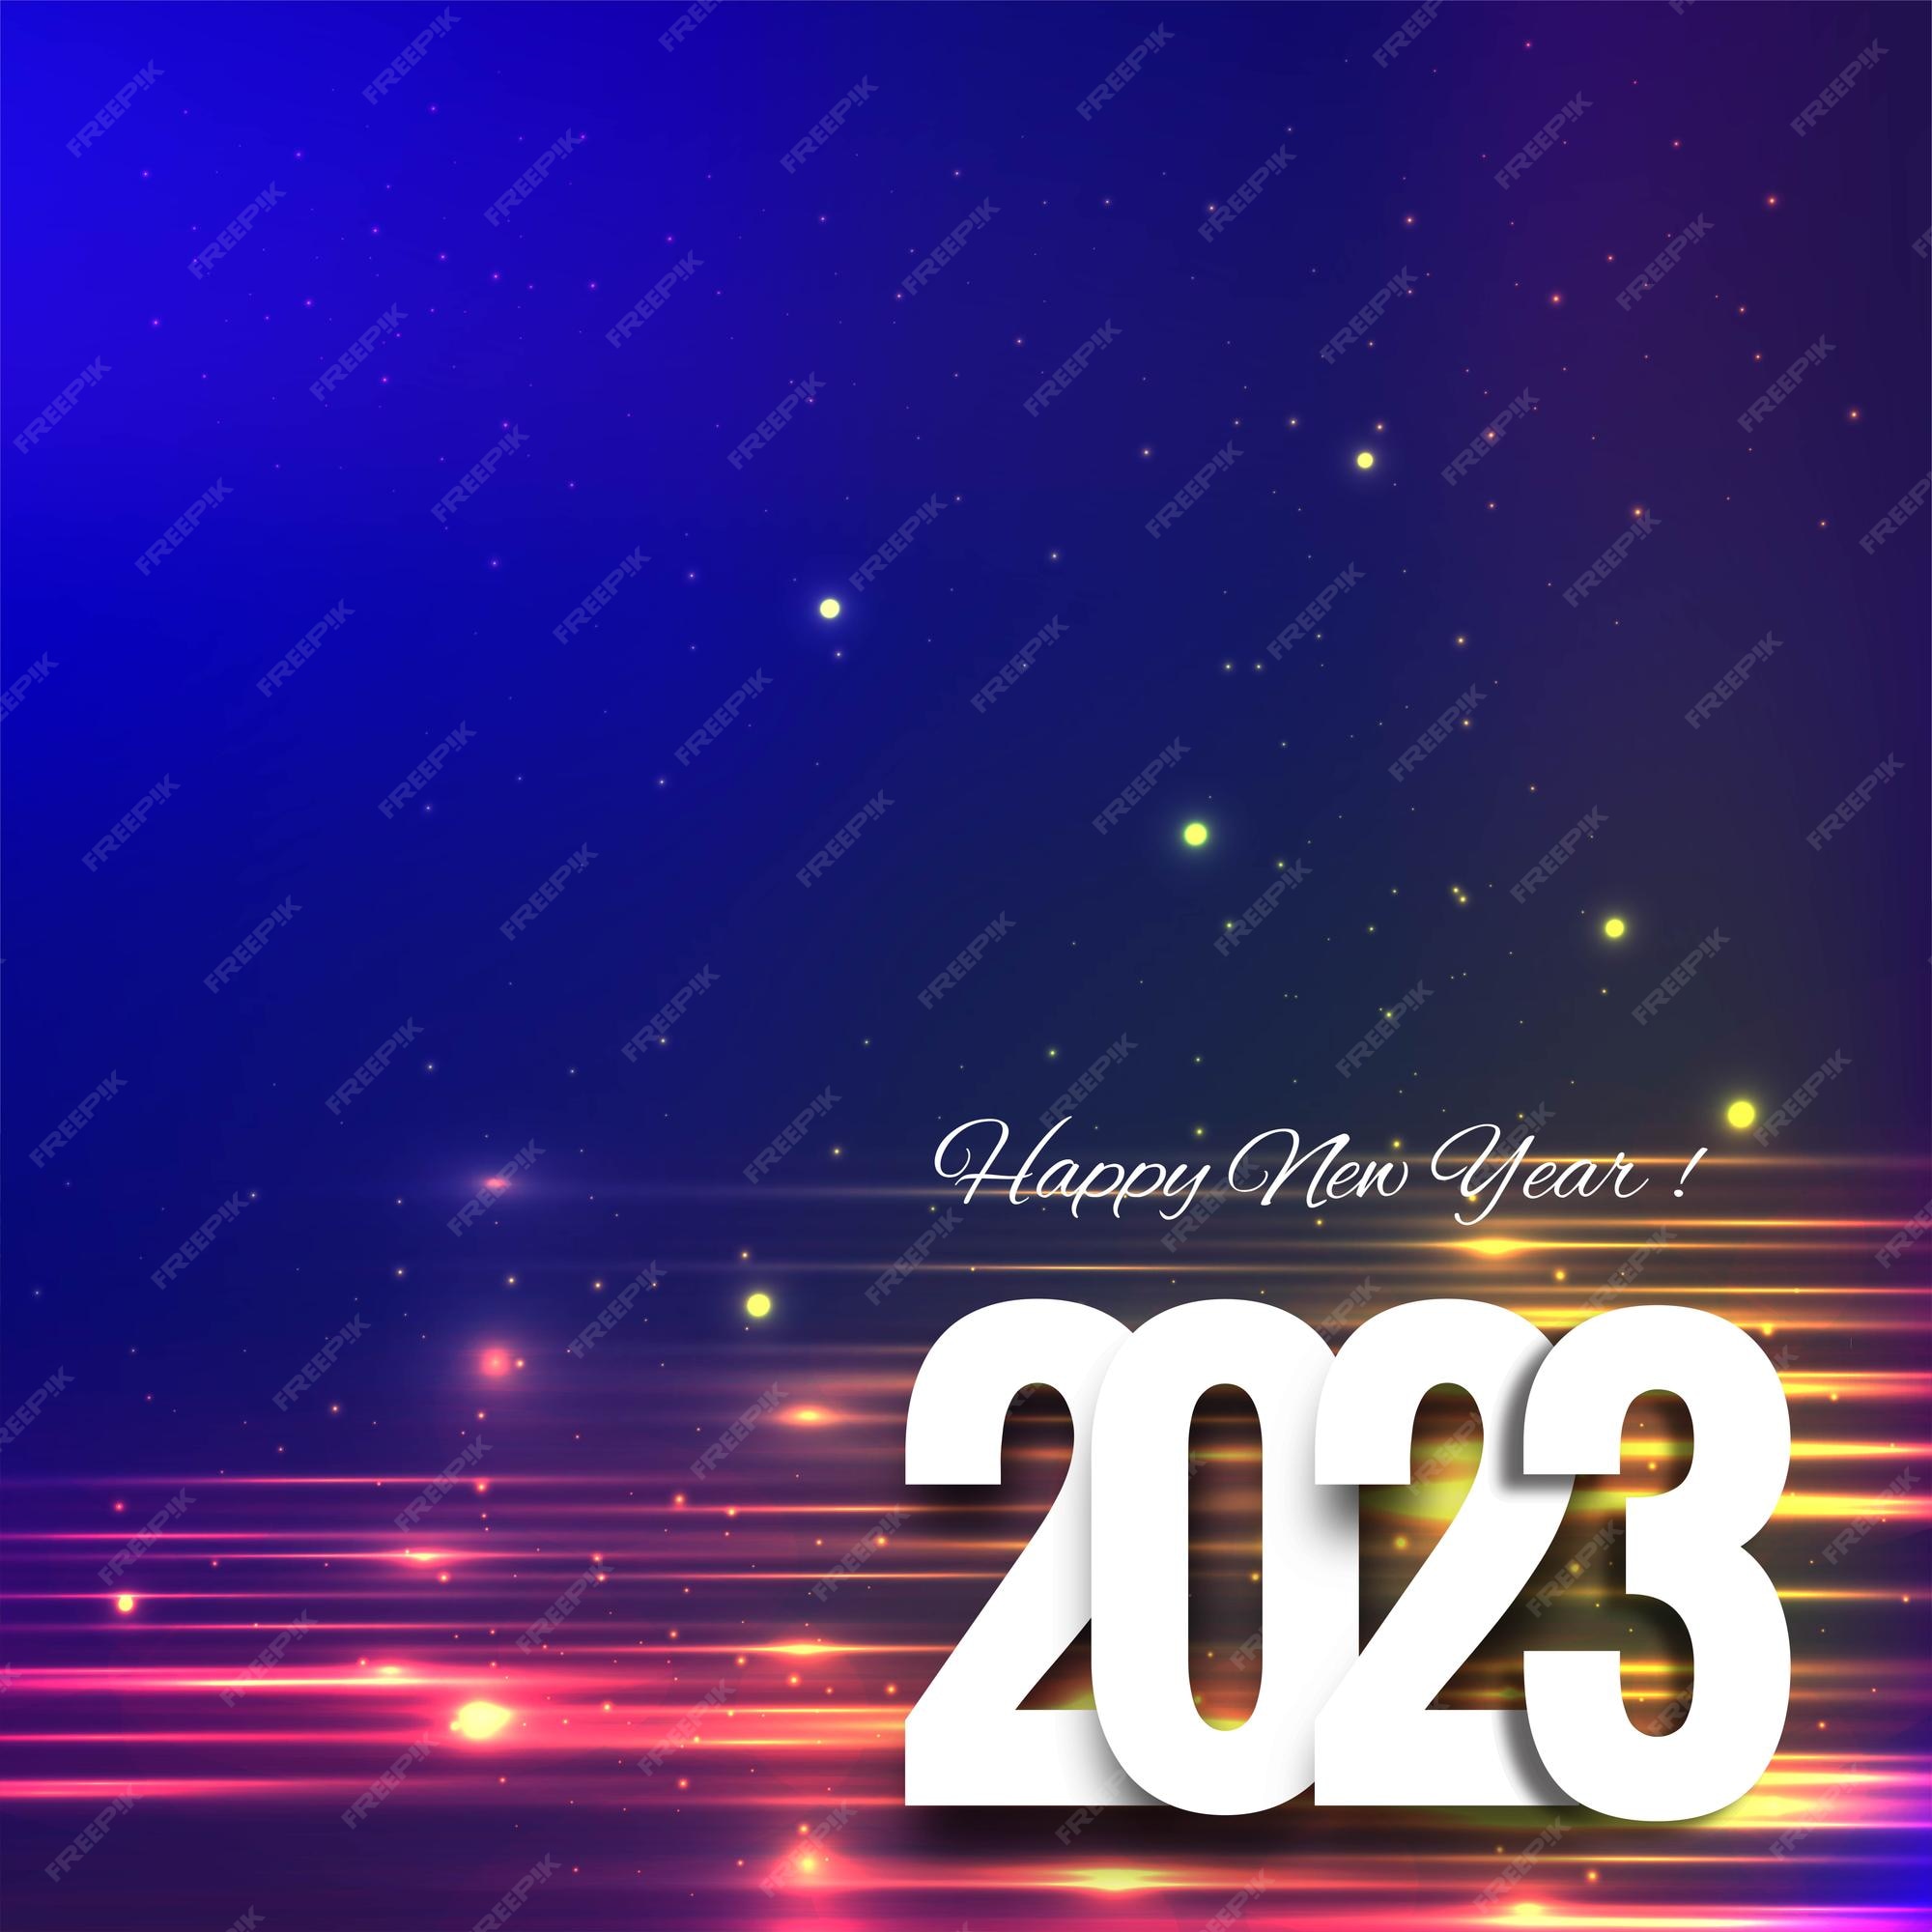 Details 300 2023 happy new year background